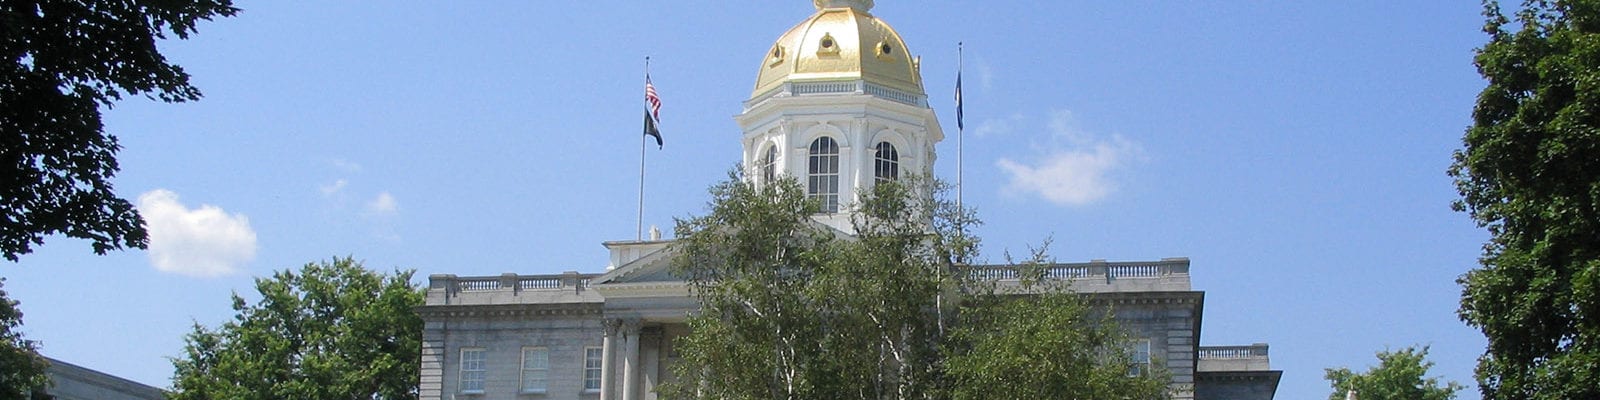 The New Hampshire Capitol Building located in Concord, New Hampshire.